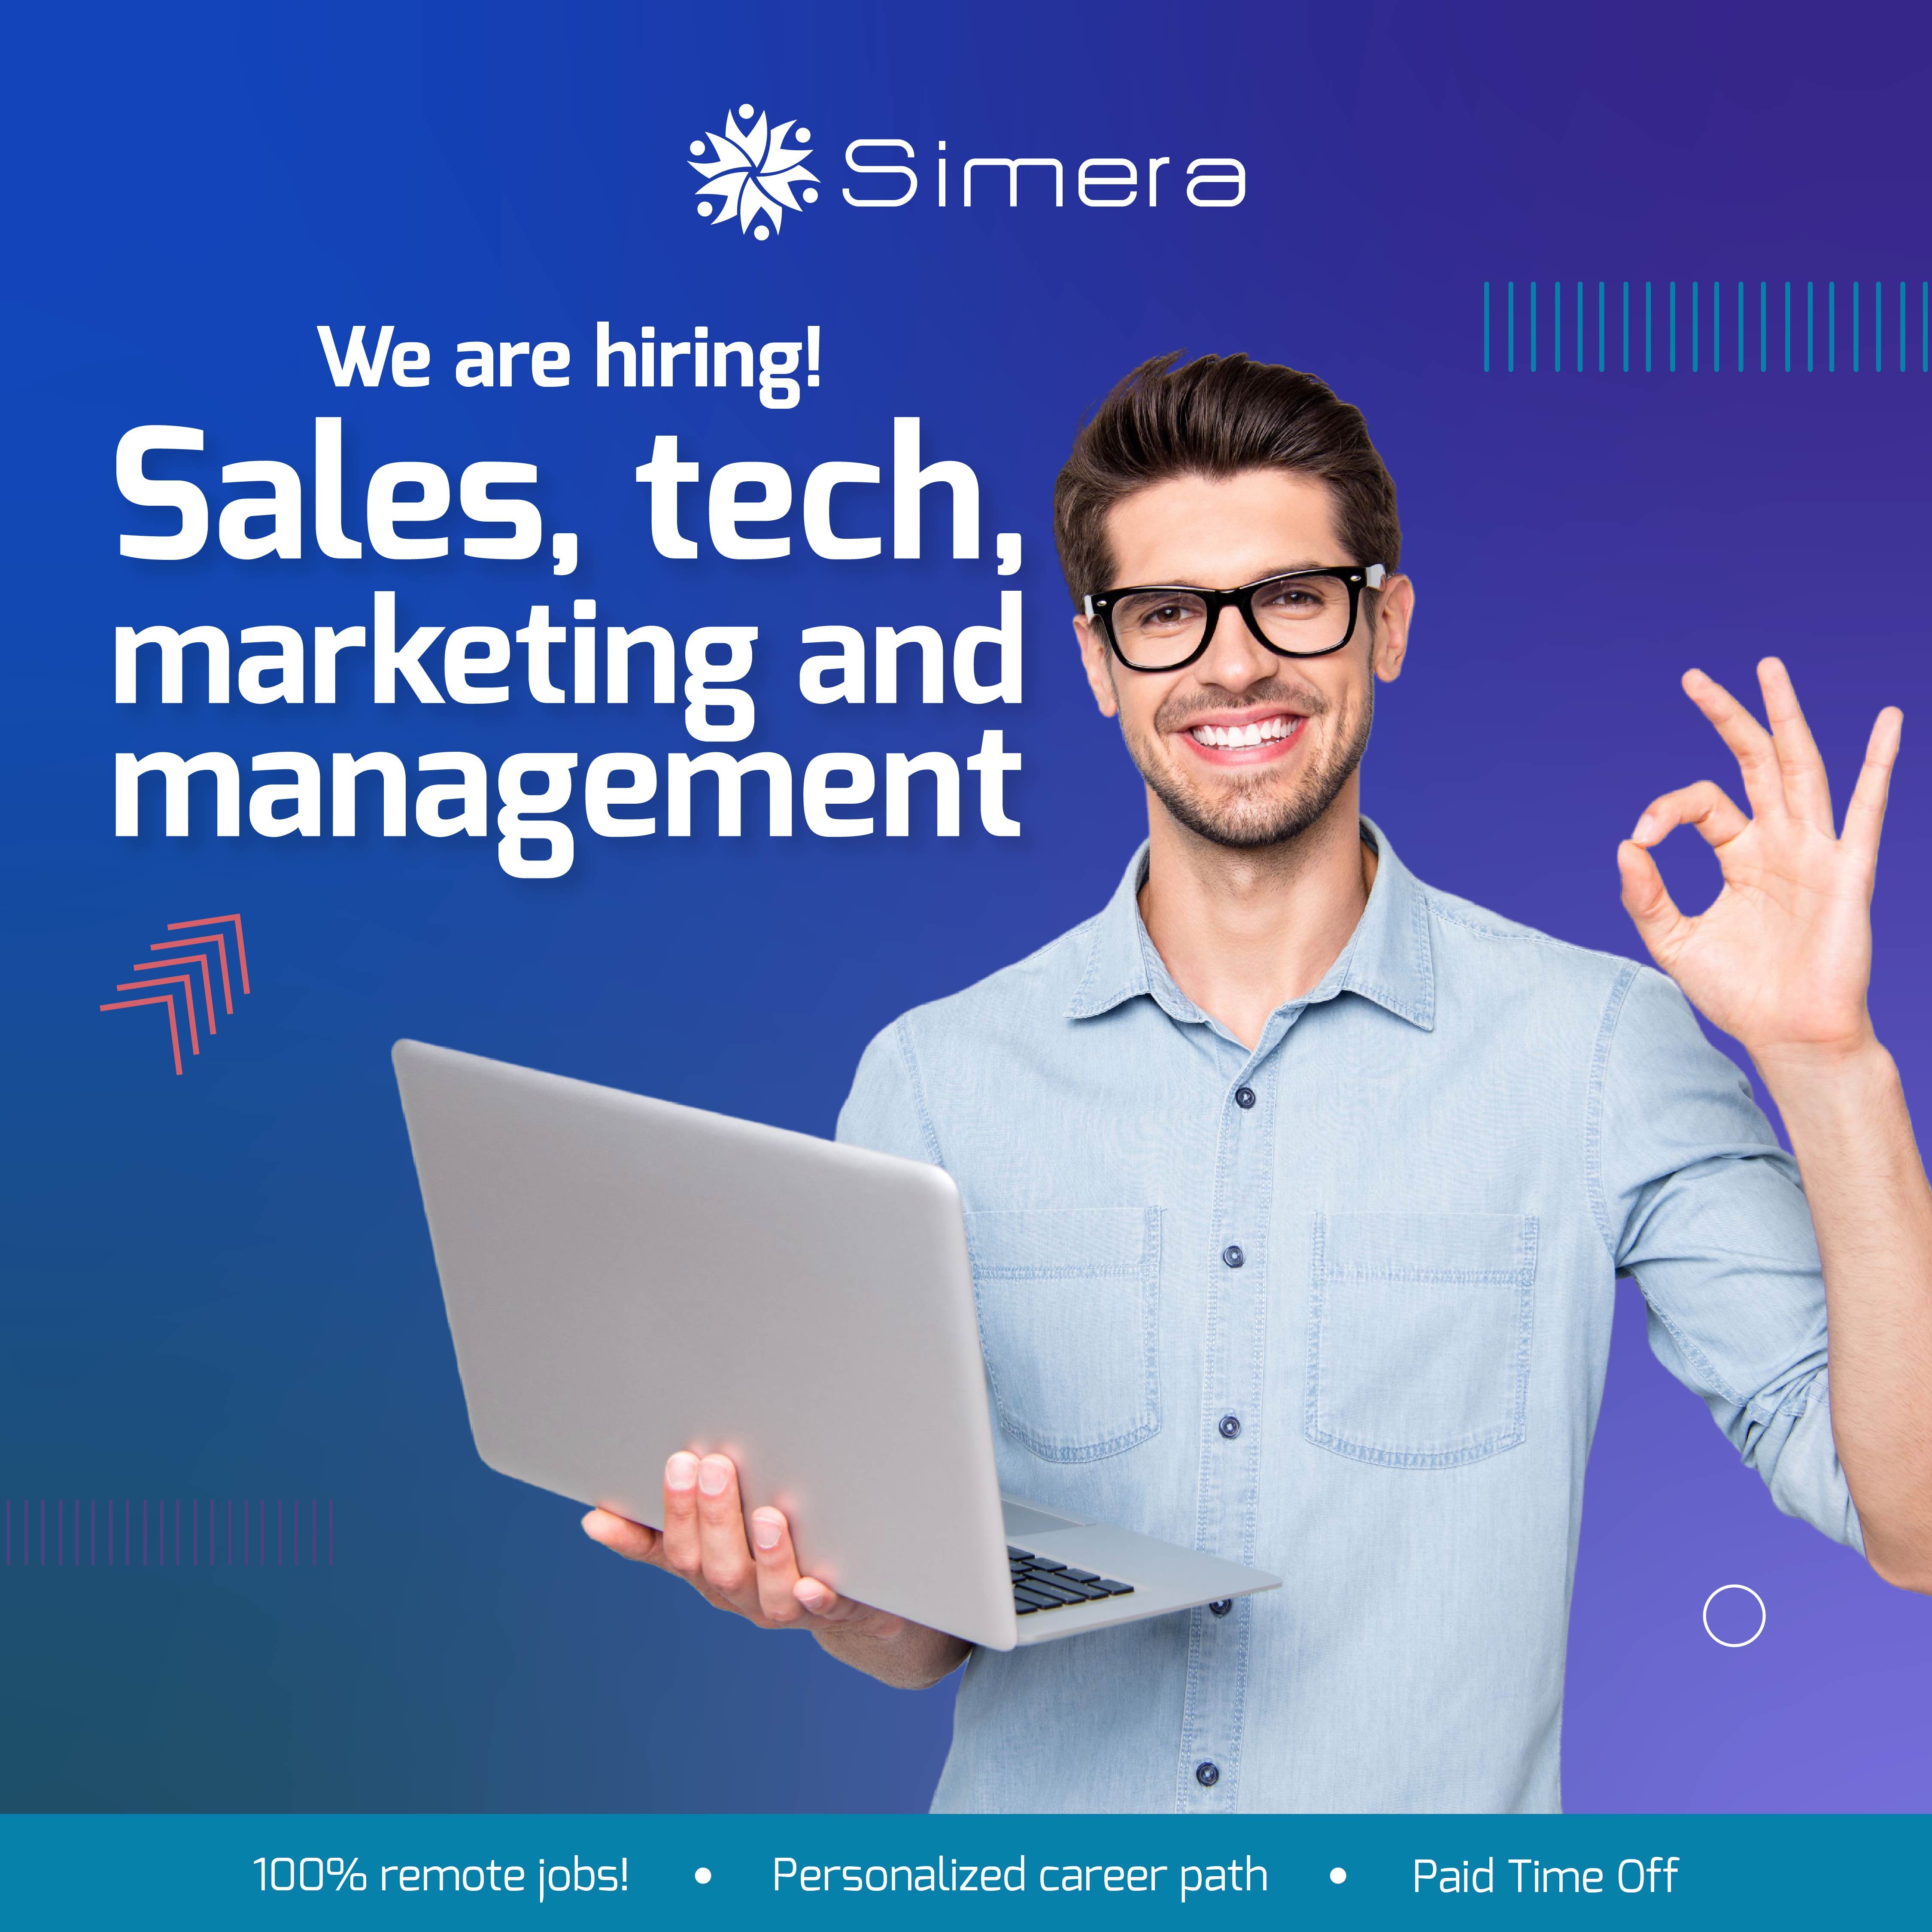 job boards ara a thing of the past, a recruiter from Simera will personally assist you through your remote application